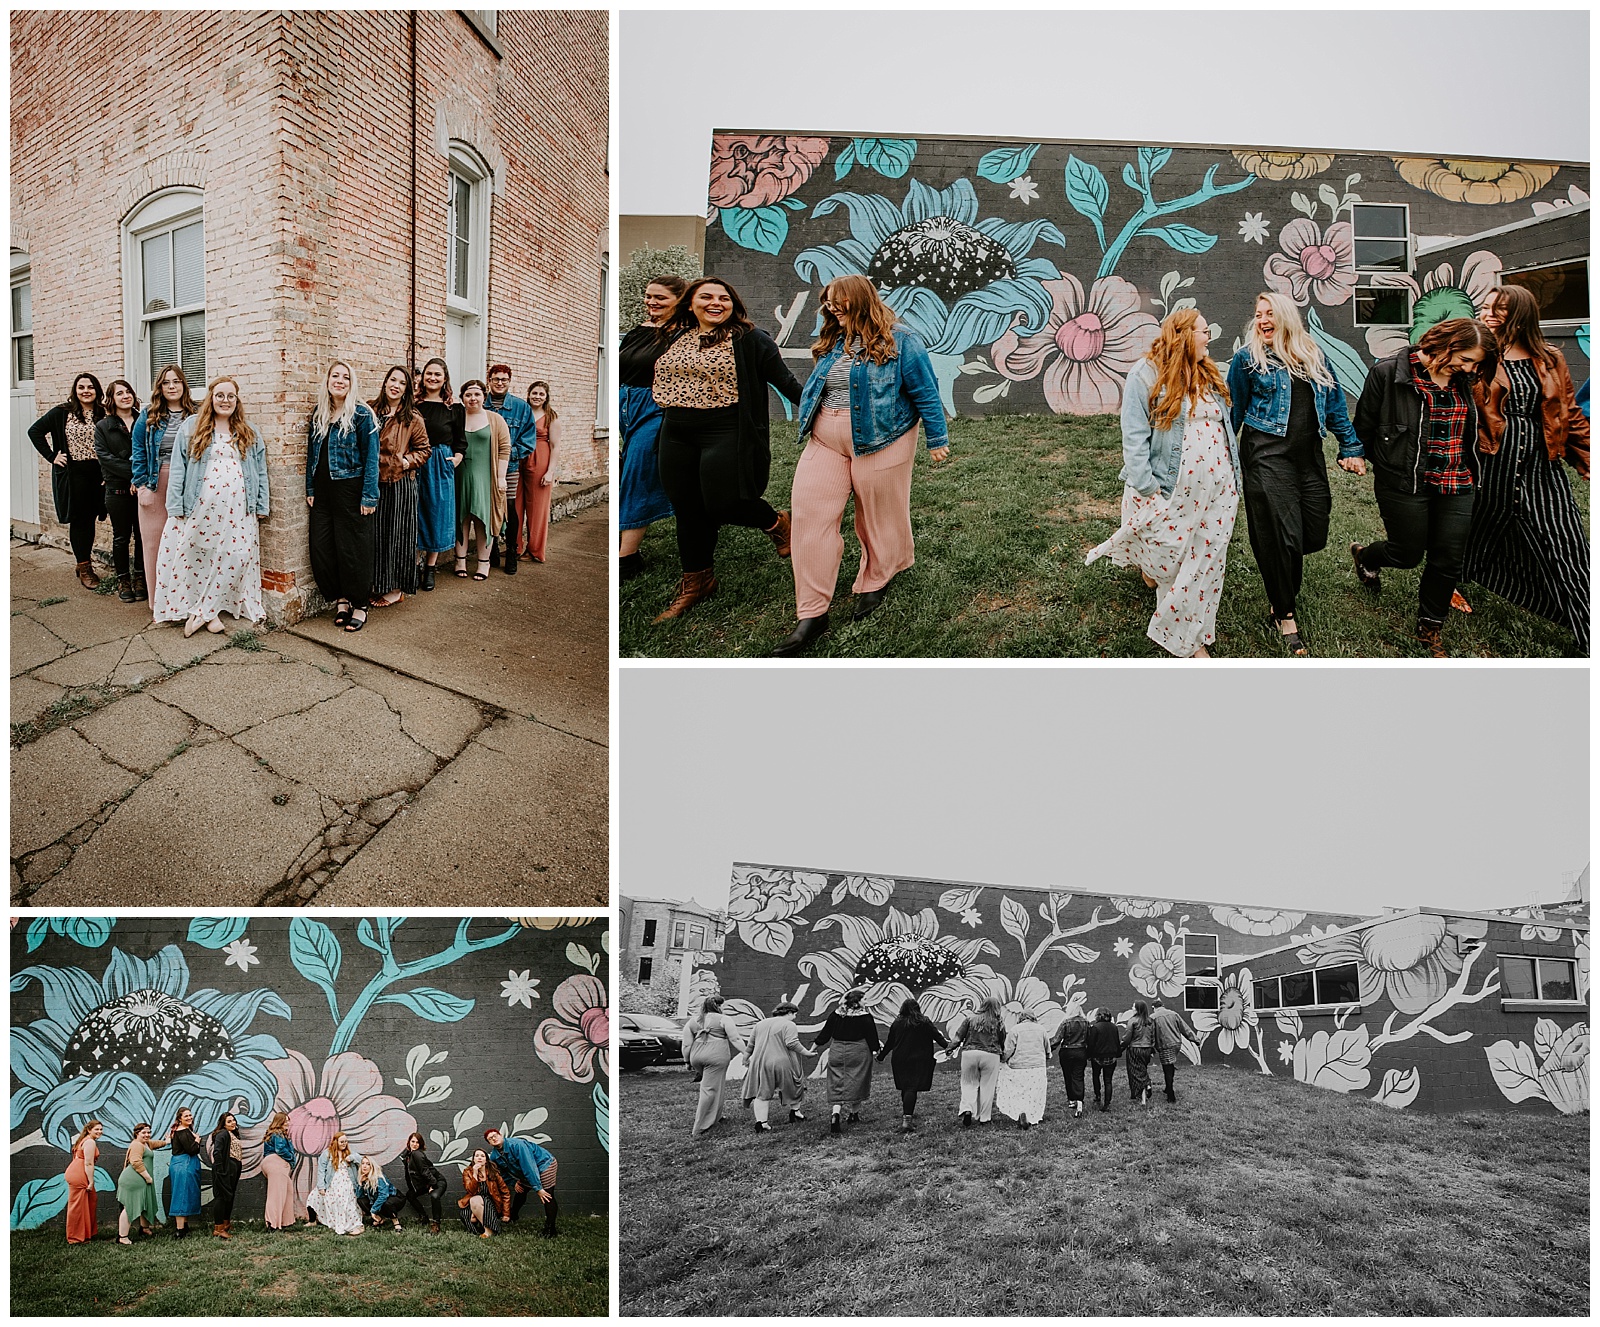 Bachelorette party photos with a diverse group of queer twenty somethings in Grand Rapids, Michigan